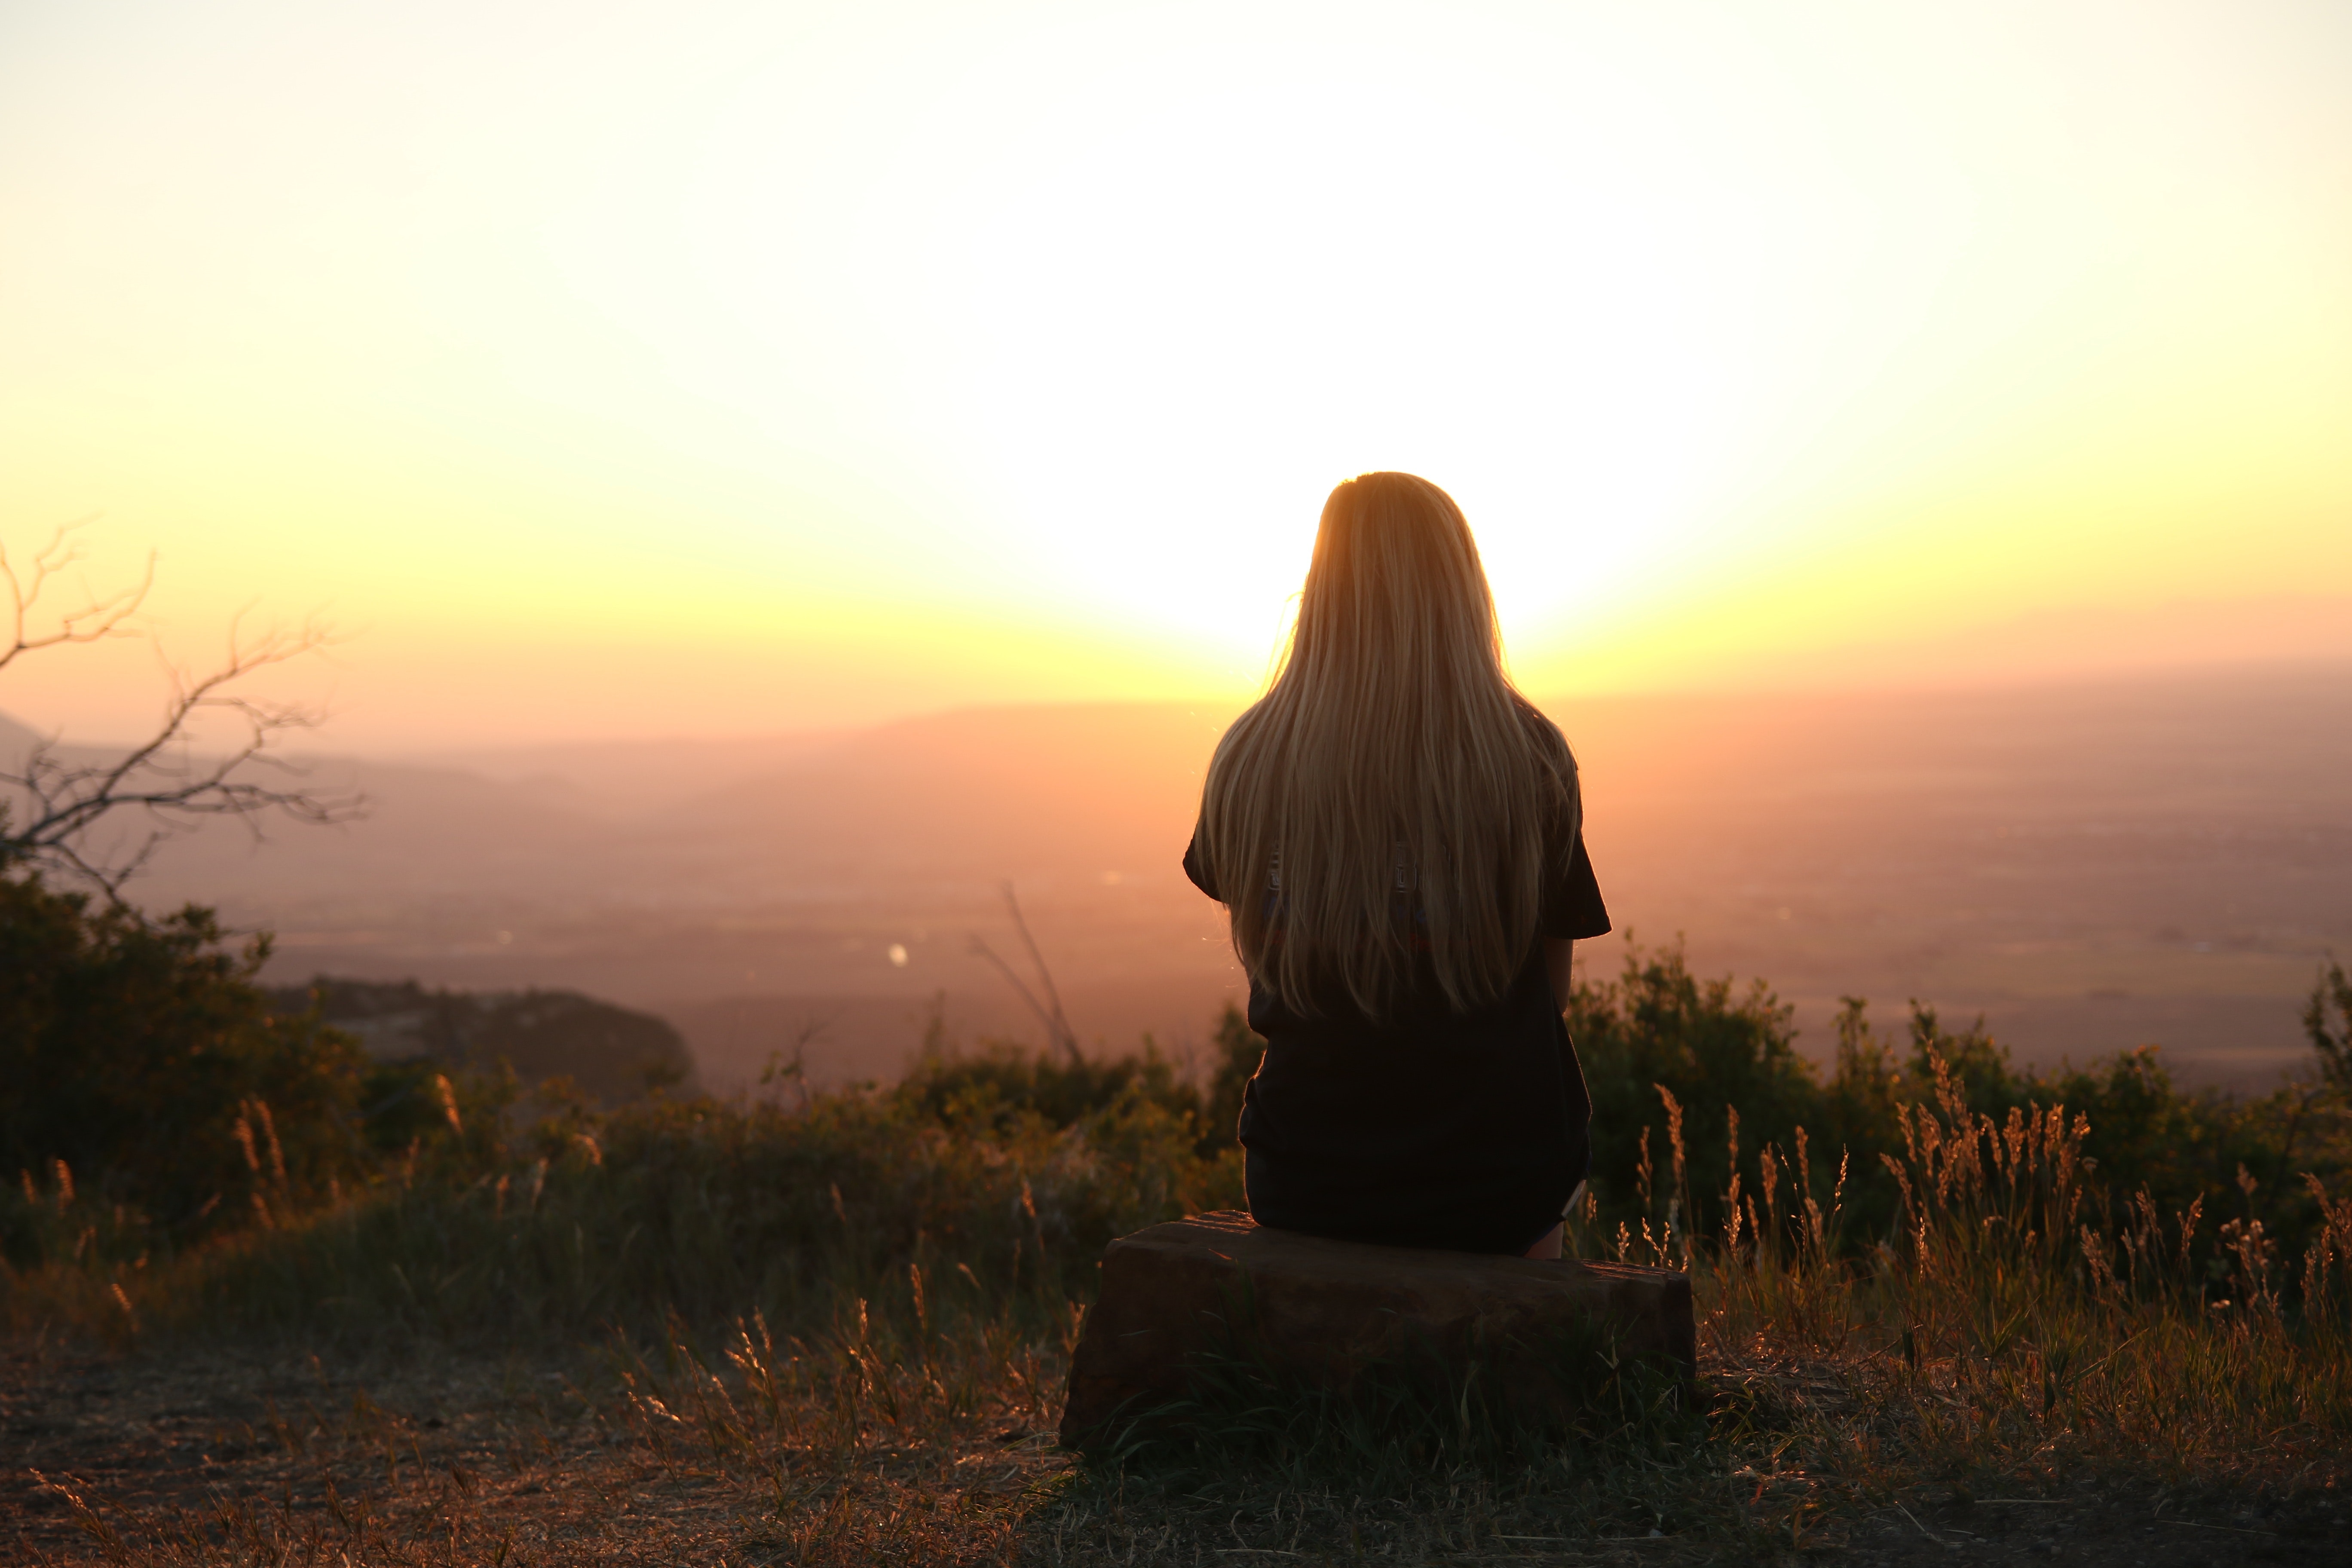 A photo of a girl sitting on a rock, watching the sun set